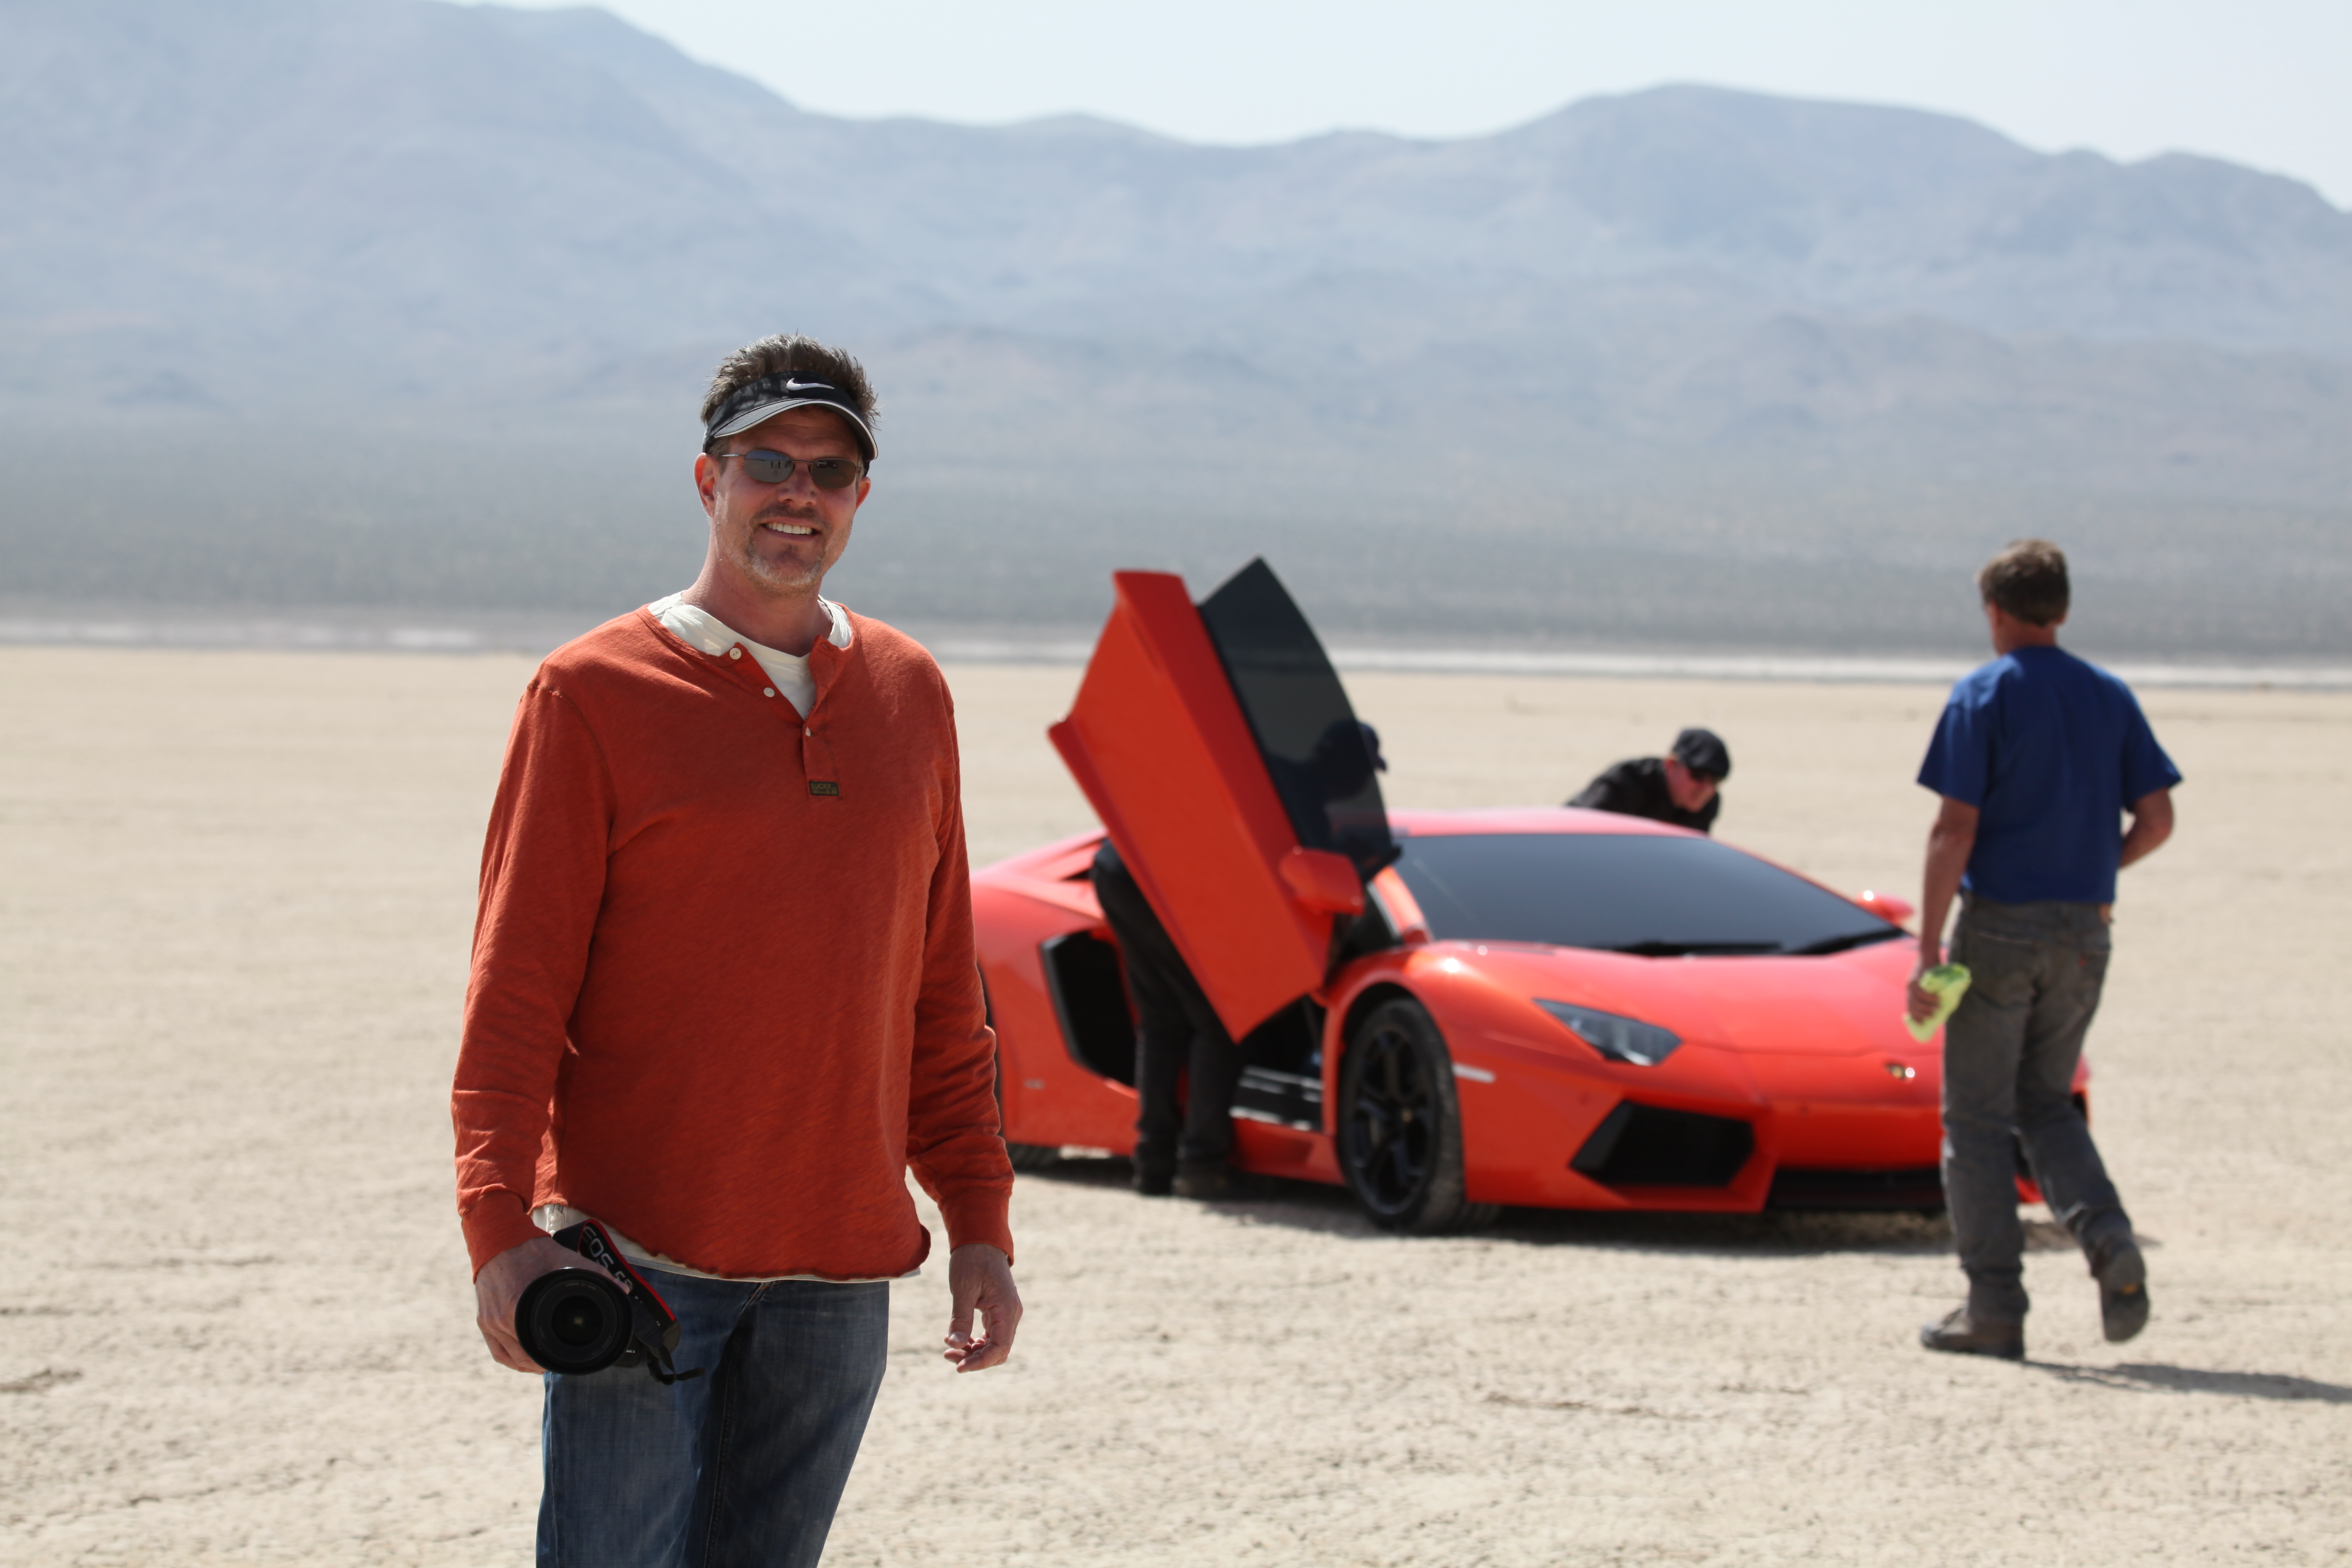 Kurt Soderling, Aerial DOP, in front of the 2011 Lamborghini Aventador. Dry lake bed just outside of Barstow CA. Final Spot: http://vimeo.com/22884674